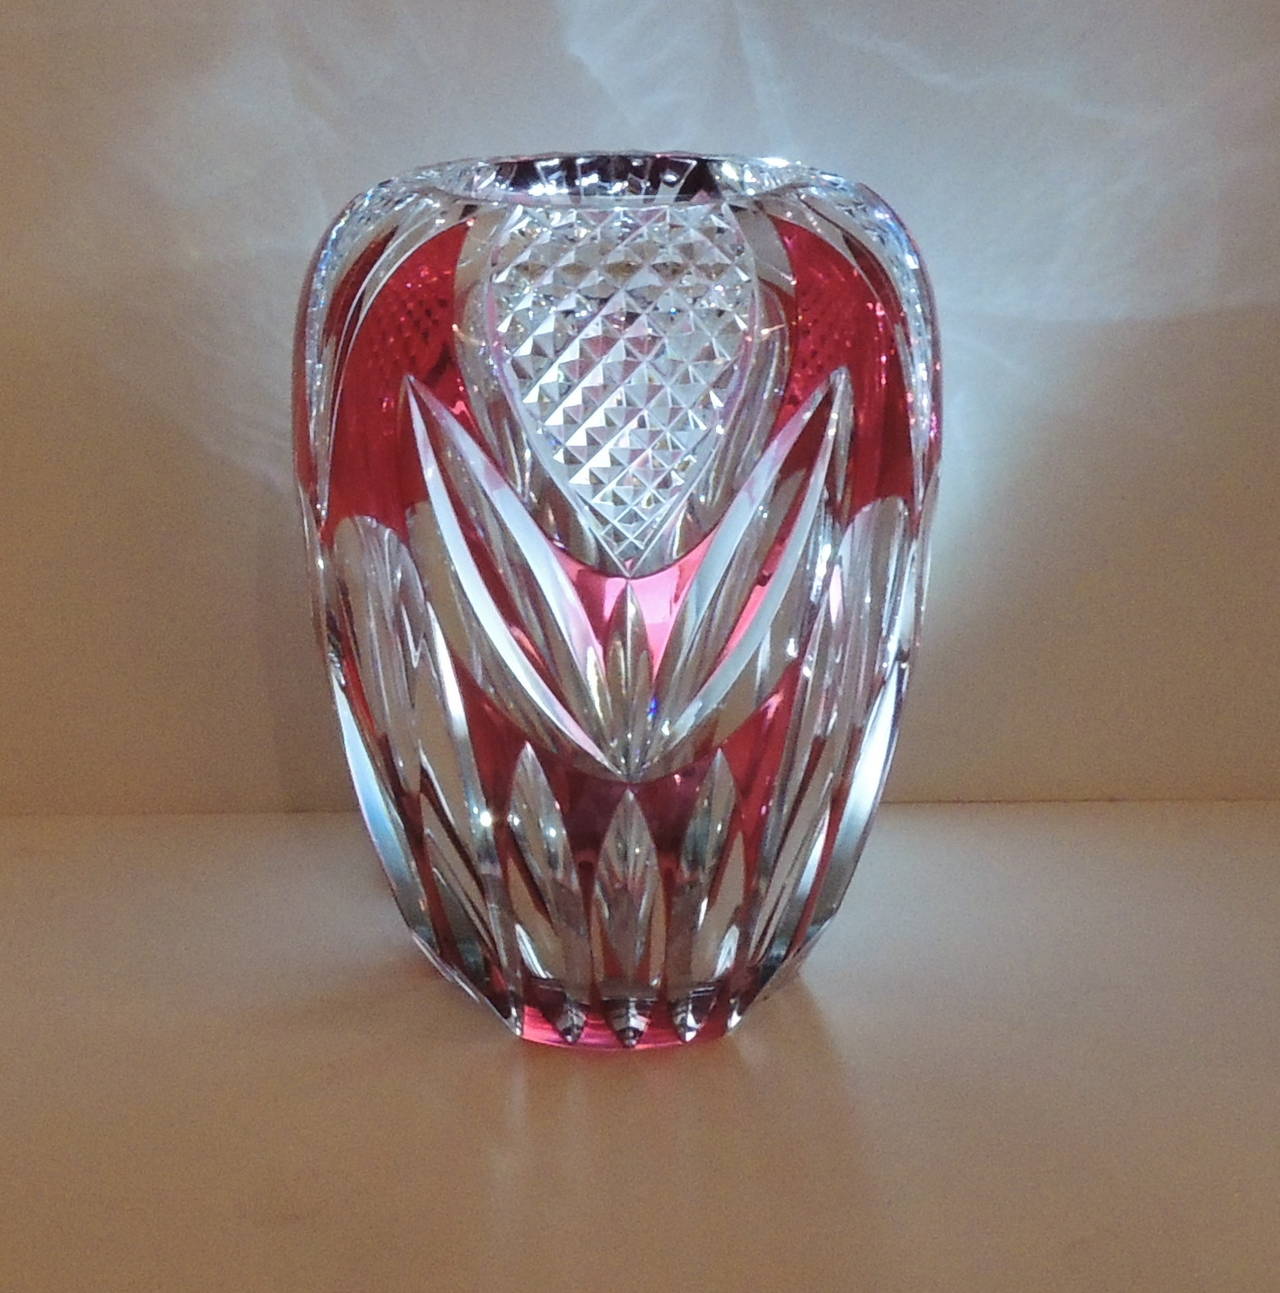 This wonderful Val St. Lambert Red Cut to Clear Cut Tulip vase is a wonderful   oval shape that will be a beautiful showpiece to put your flowers in or to add beautiful color to your shelf or table. Original label on vase and signed. From the